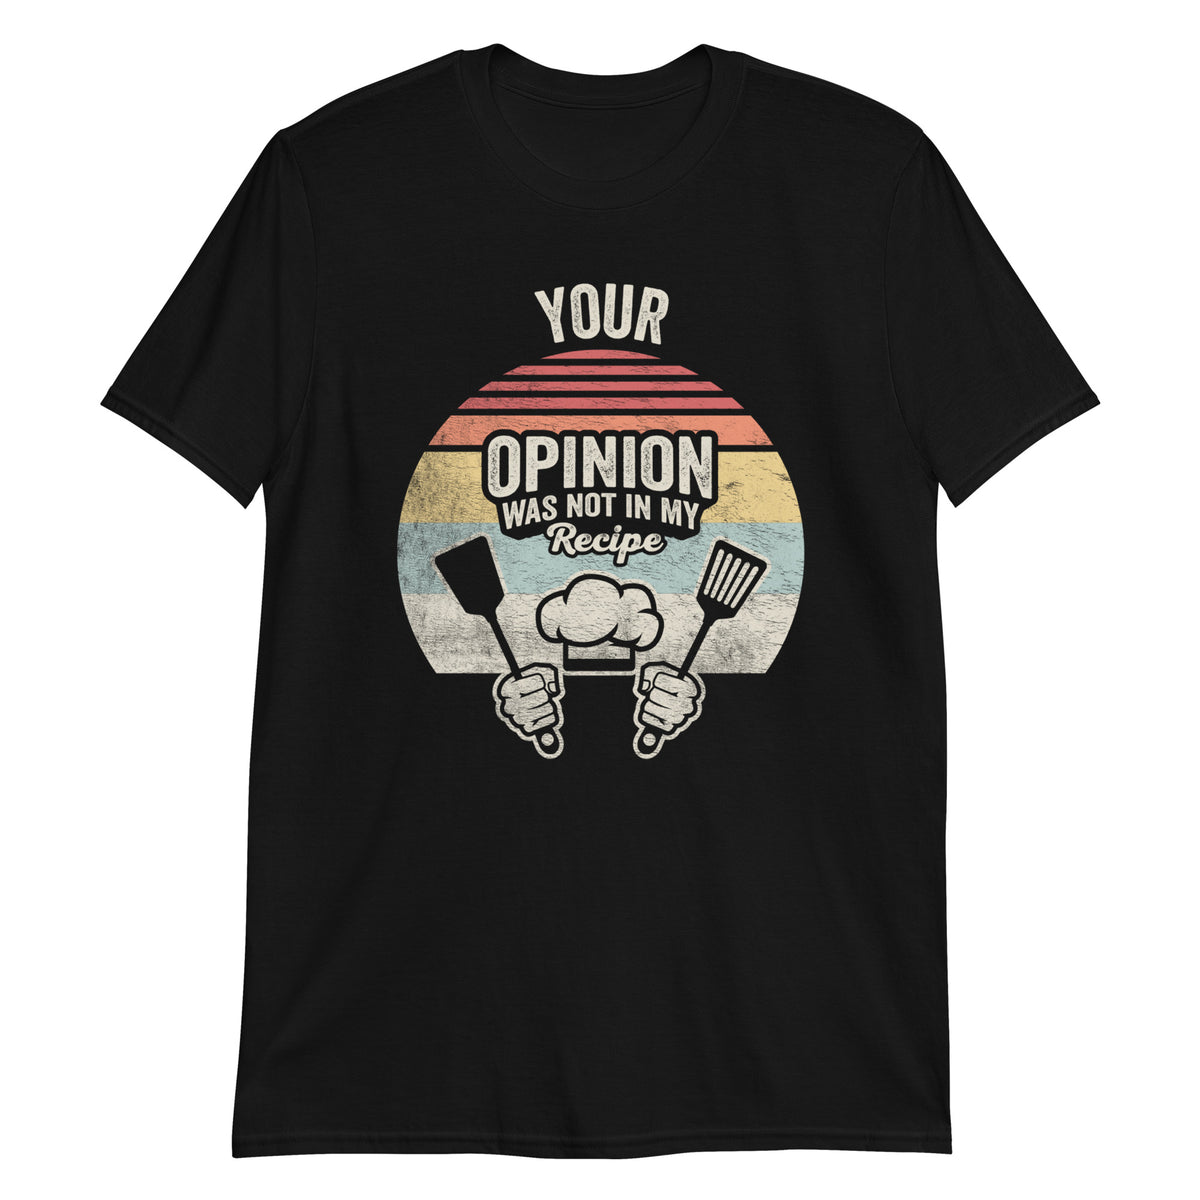 Your Opinion Was Not in My Recipe T-Shirt